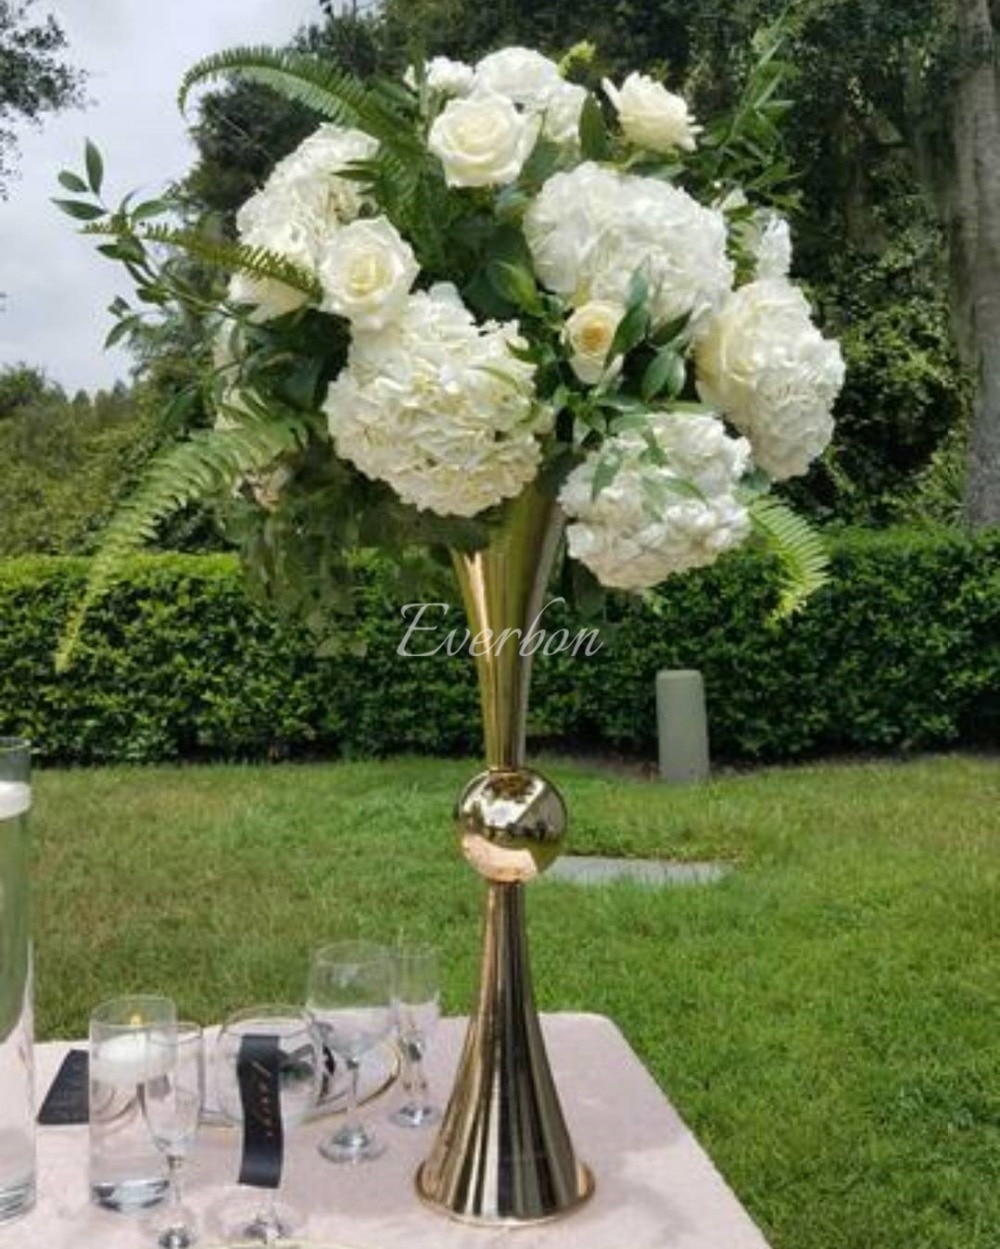 Us 3200 Wedding Decoration Table Centerpiece Vases Metal Flower Vase Gold Silver Trumpet Vase Anniversary Ceremony Party Decor Suppliesparty Diy intended for proportions 1000 X 1249